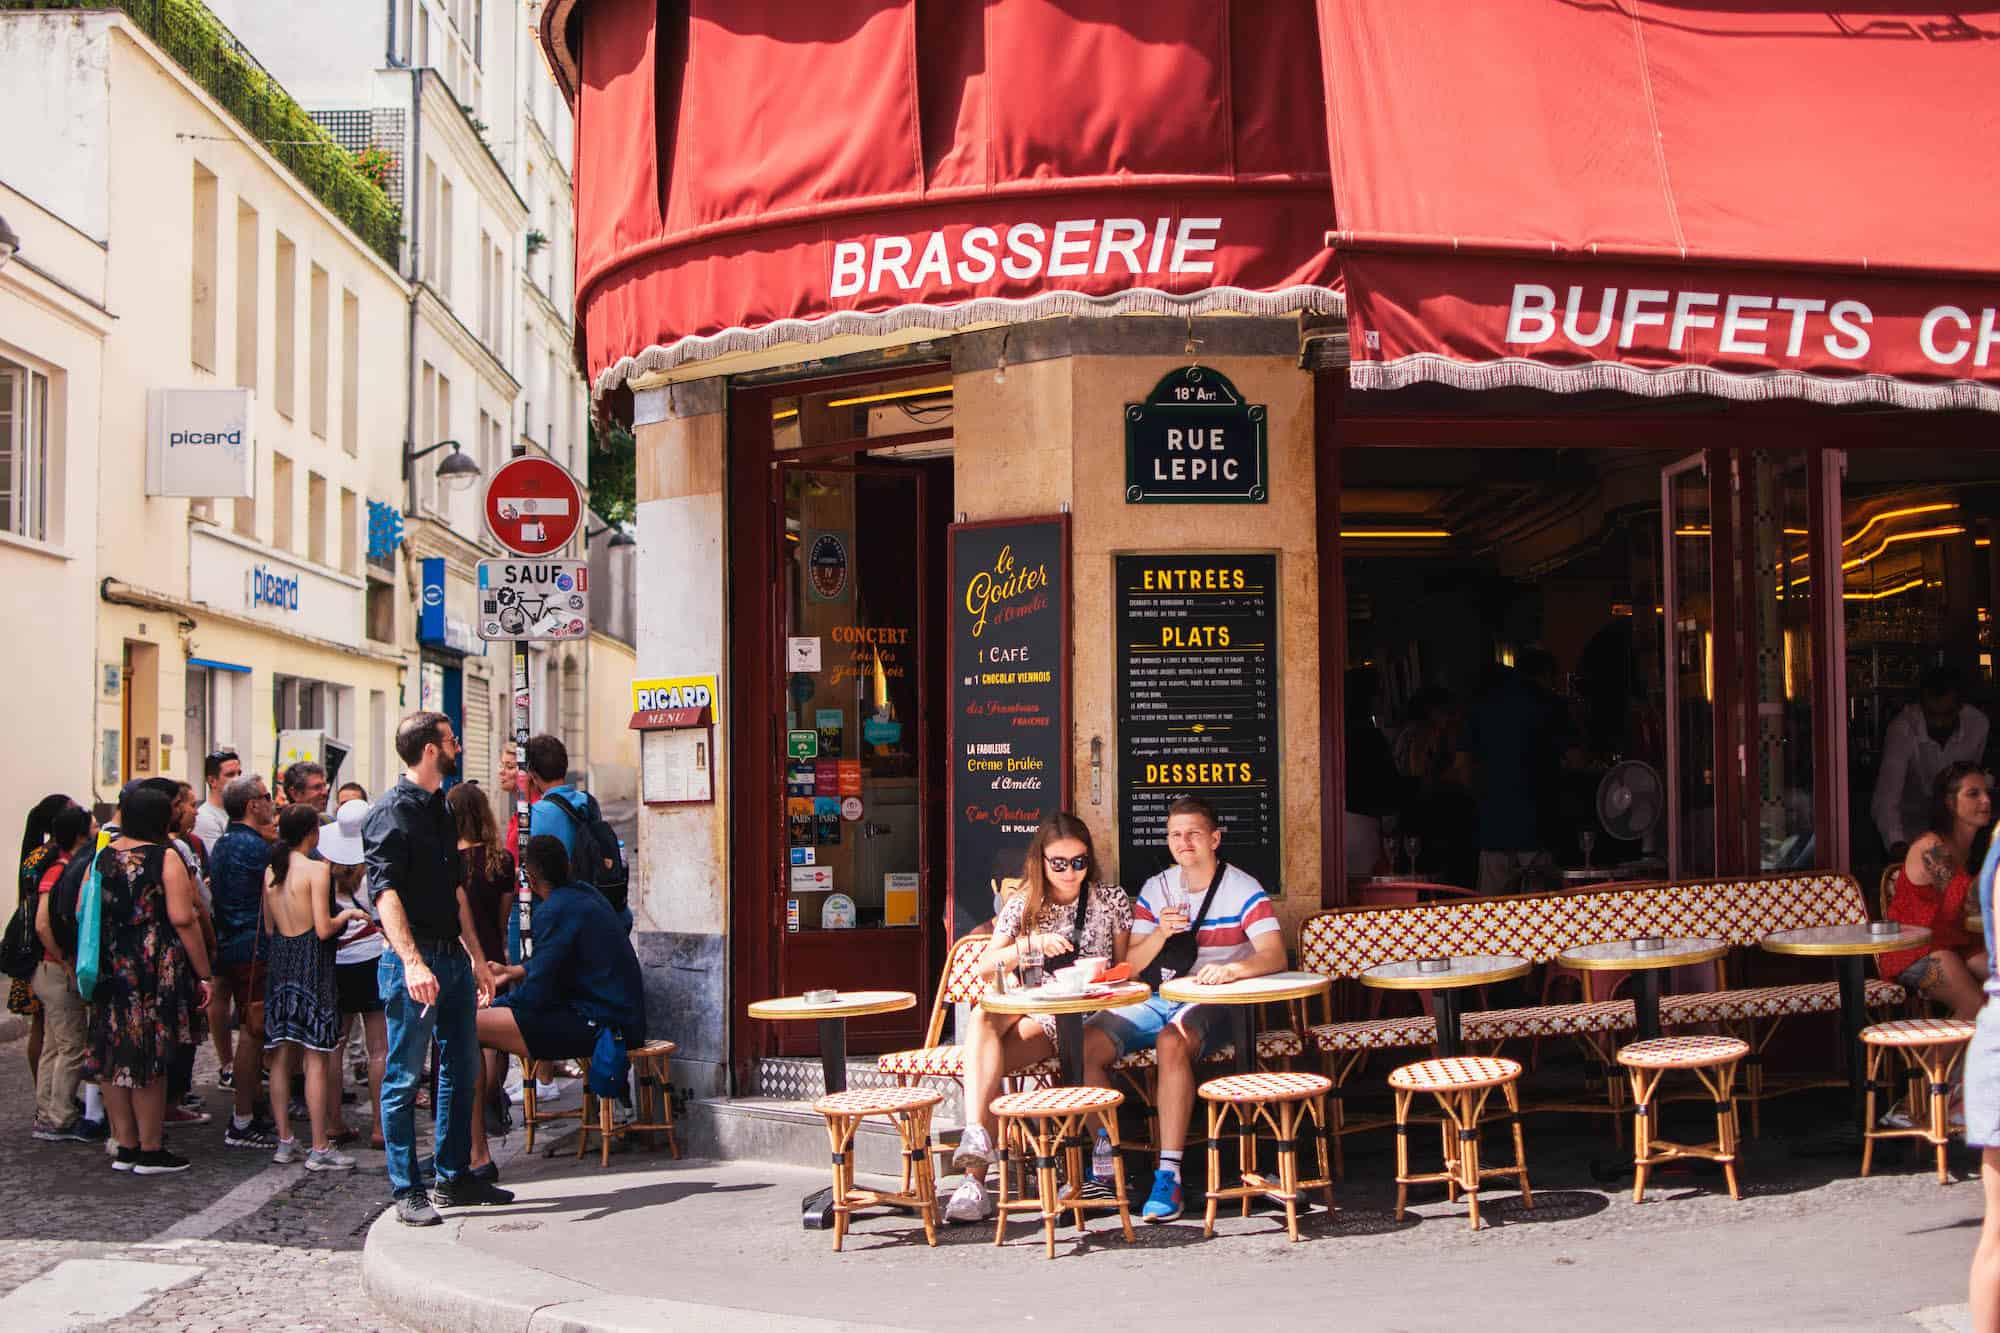 A typical Parisian brasserie with a red awning and people sitting on the terrace in the sunshine.